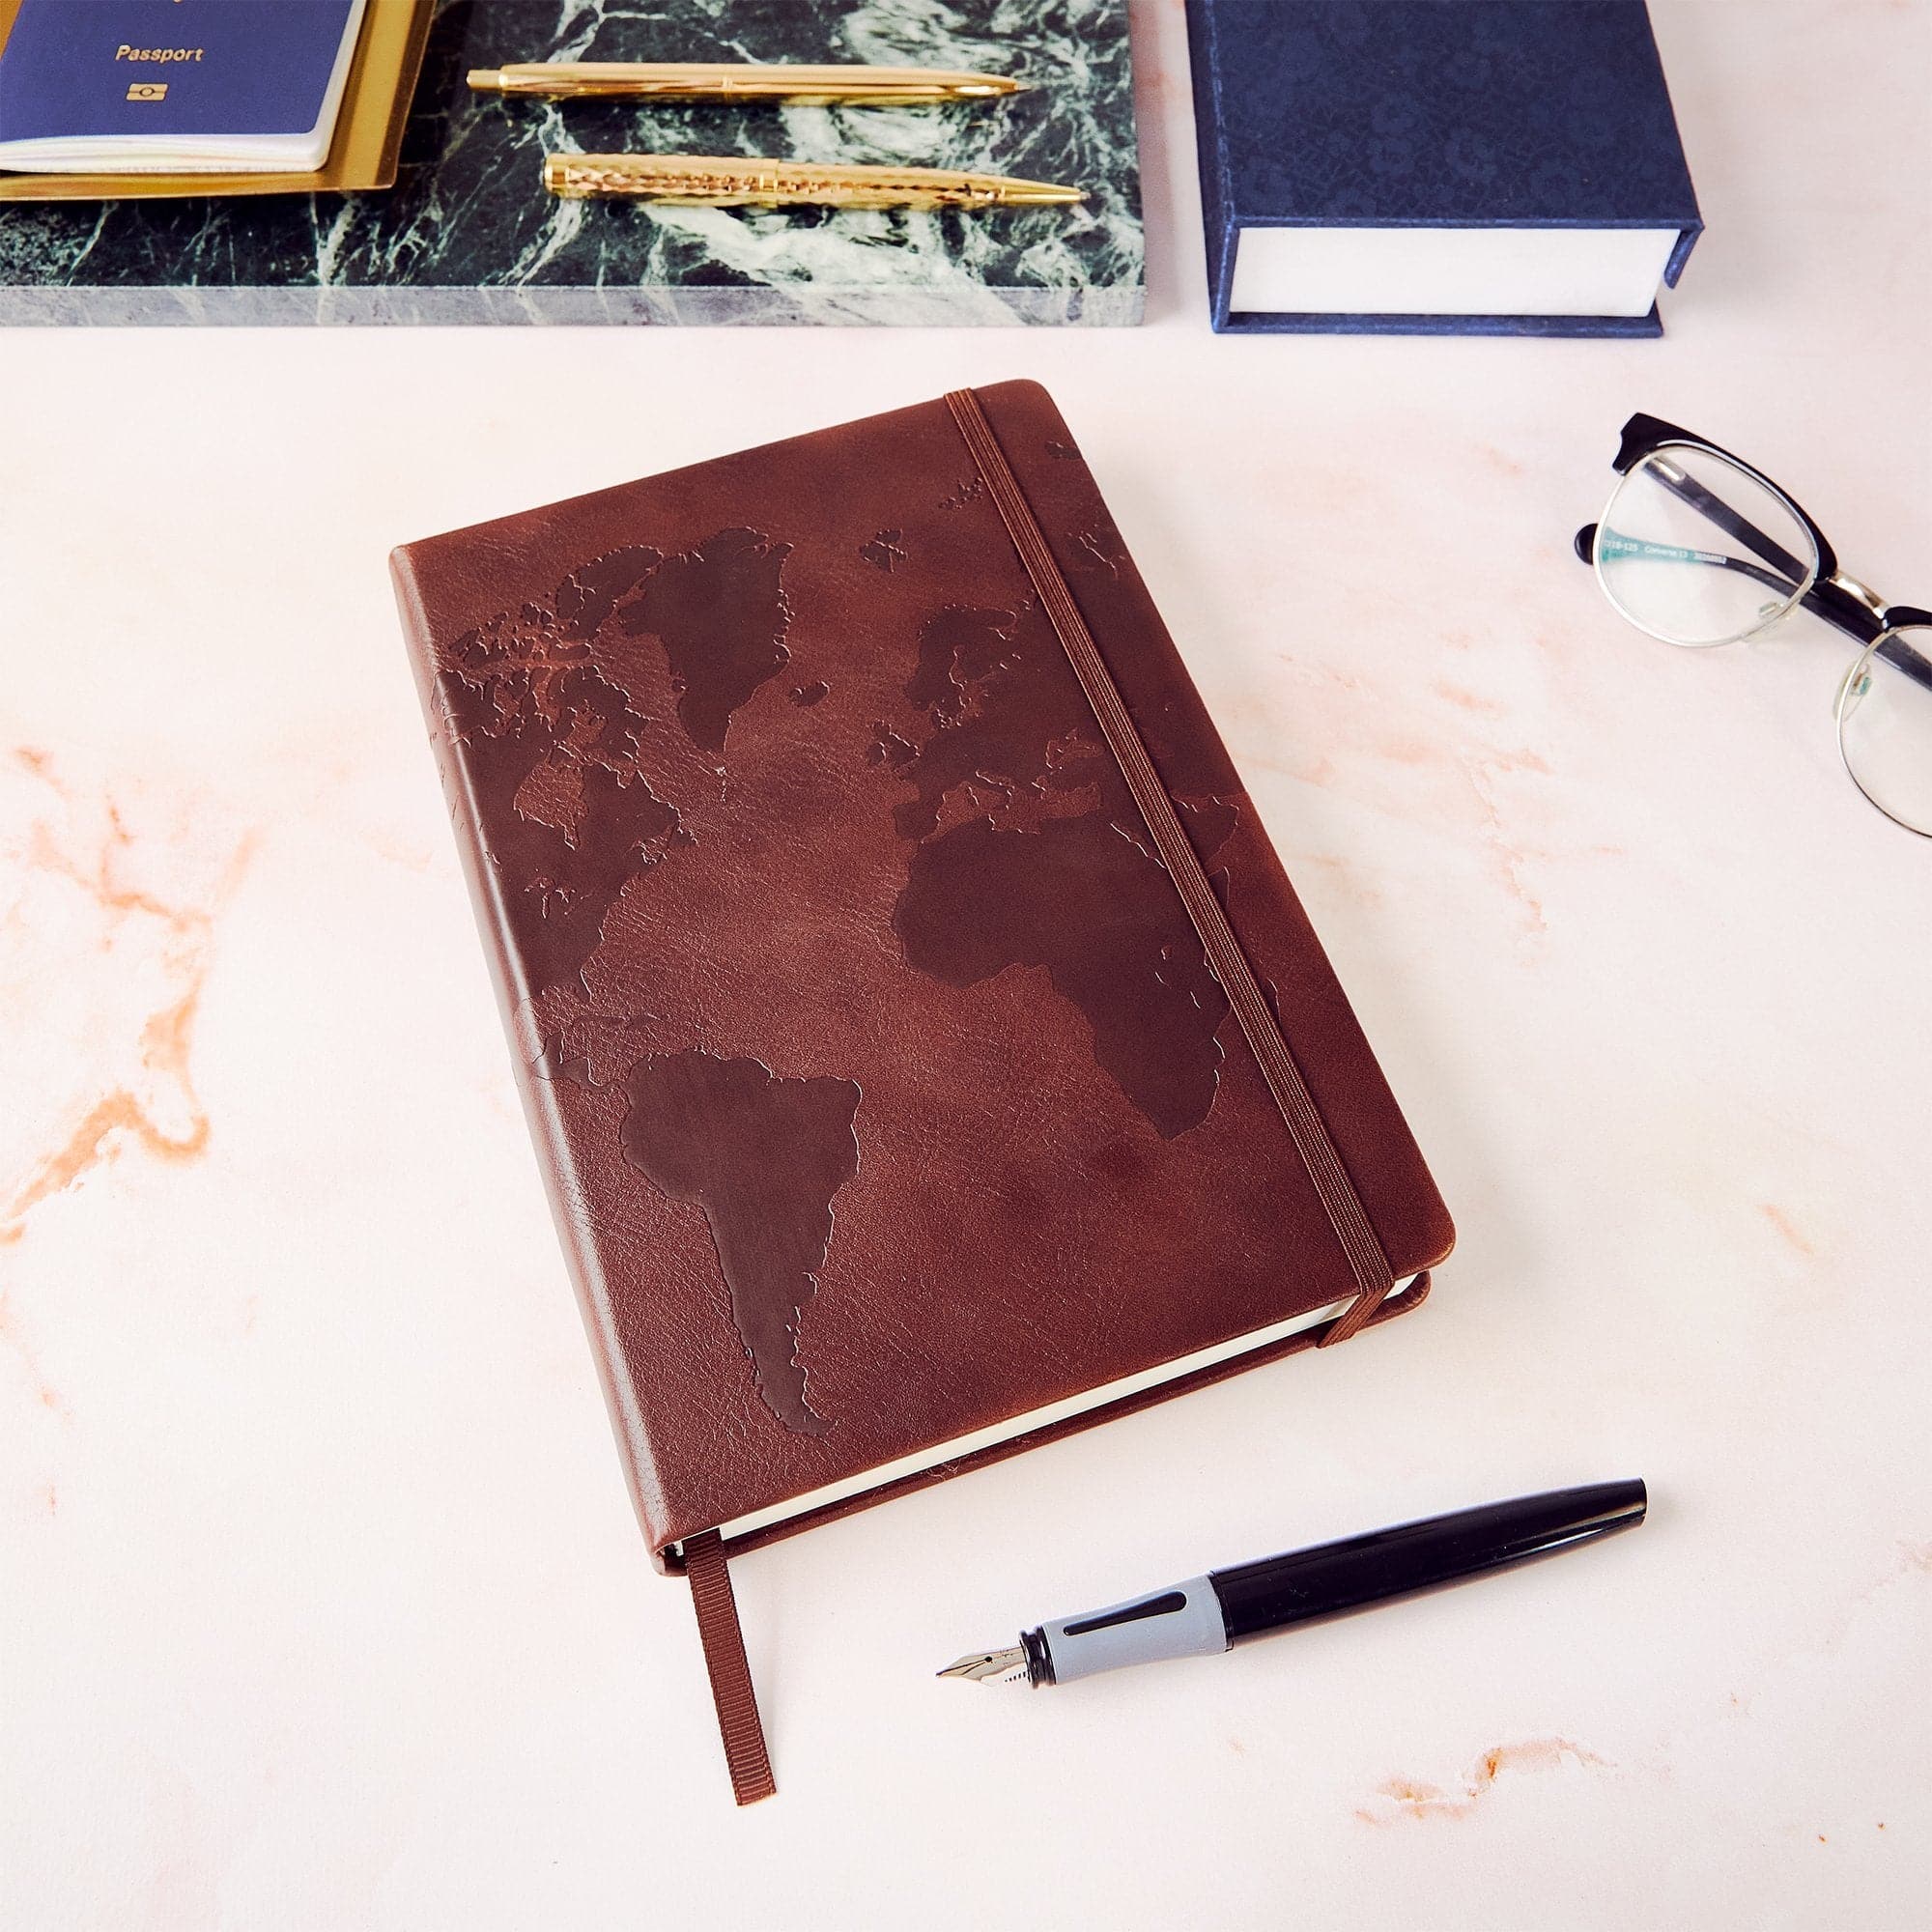 Rustic Chestnut Brown A5 planner, your leather-bound ally for documenting global adventures.